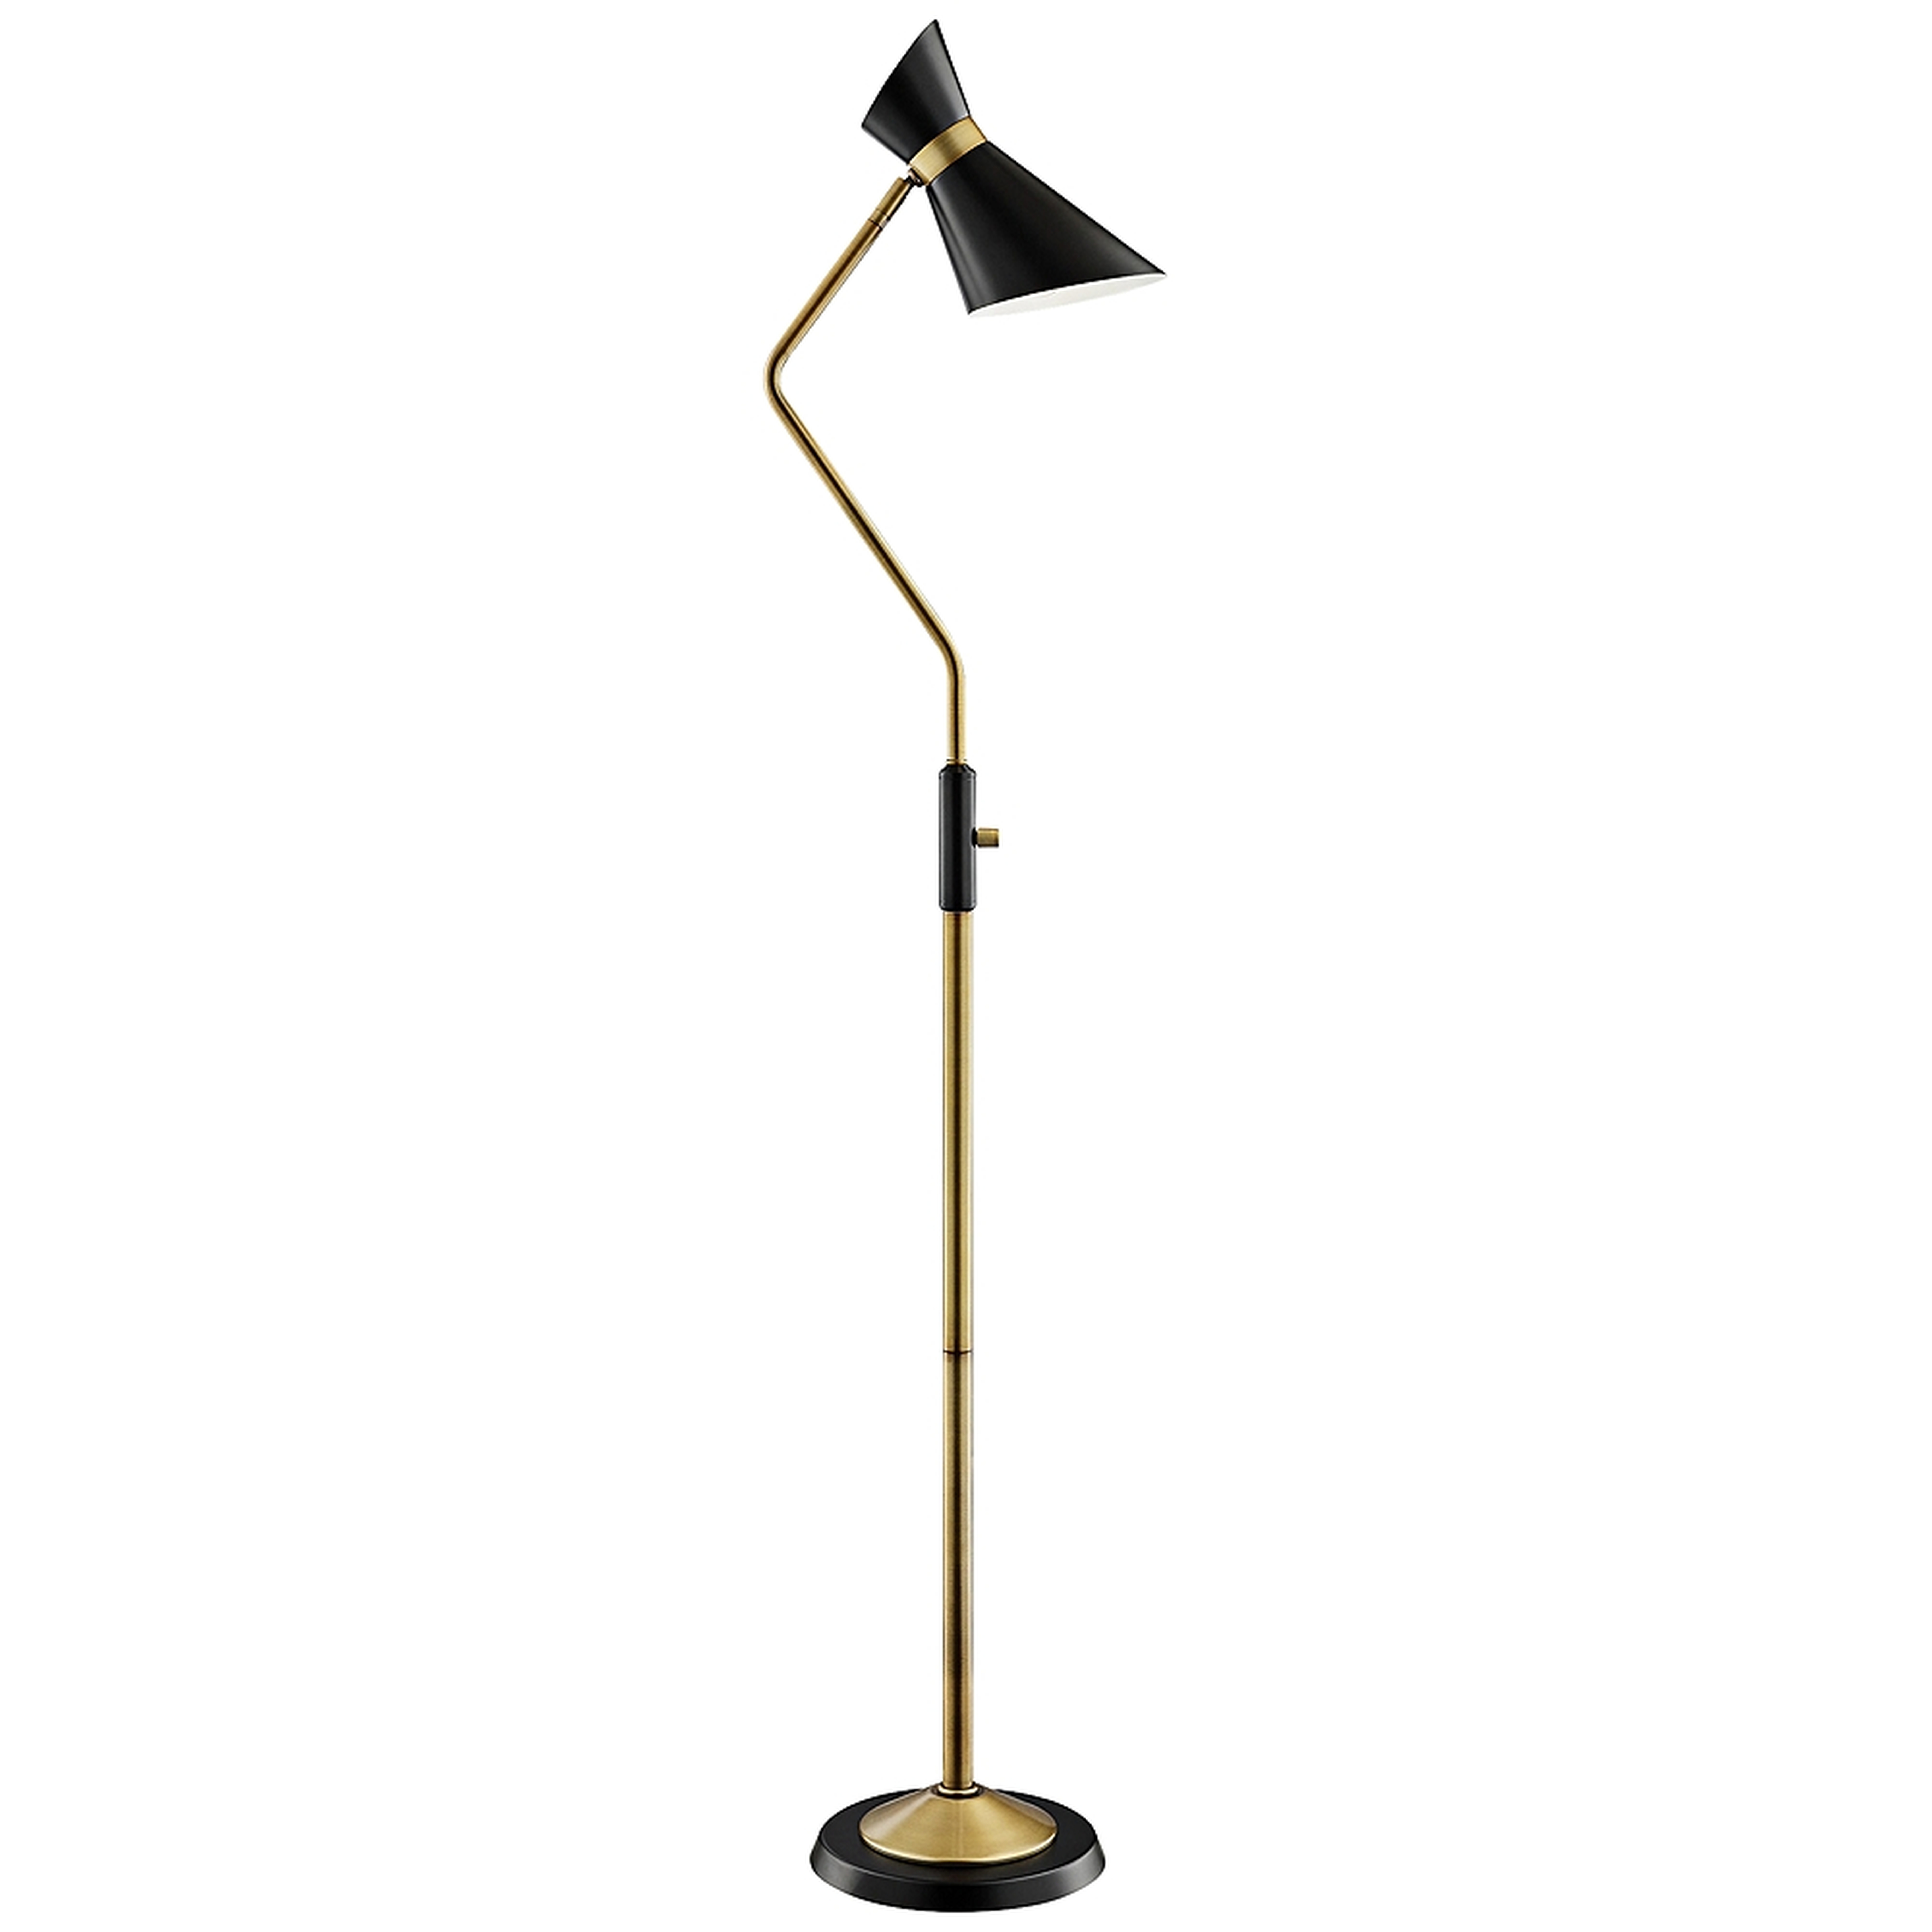 Jared Black and Antique Brass Modern Floor Lamp - Lamps Plus